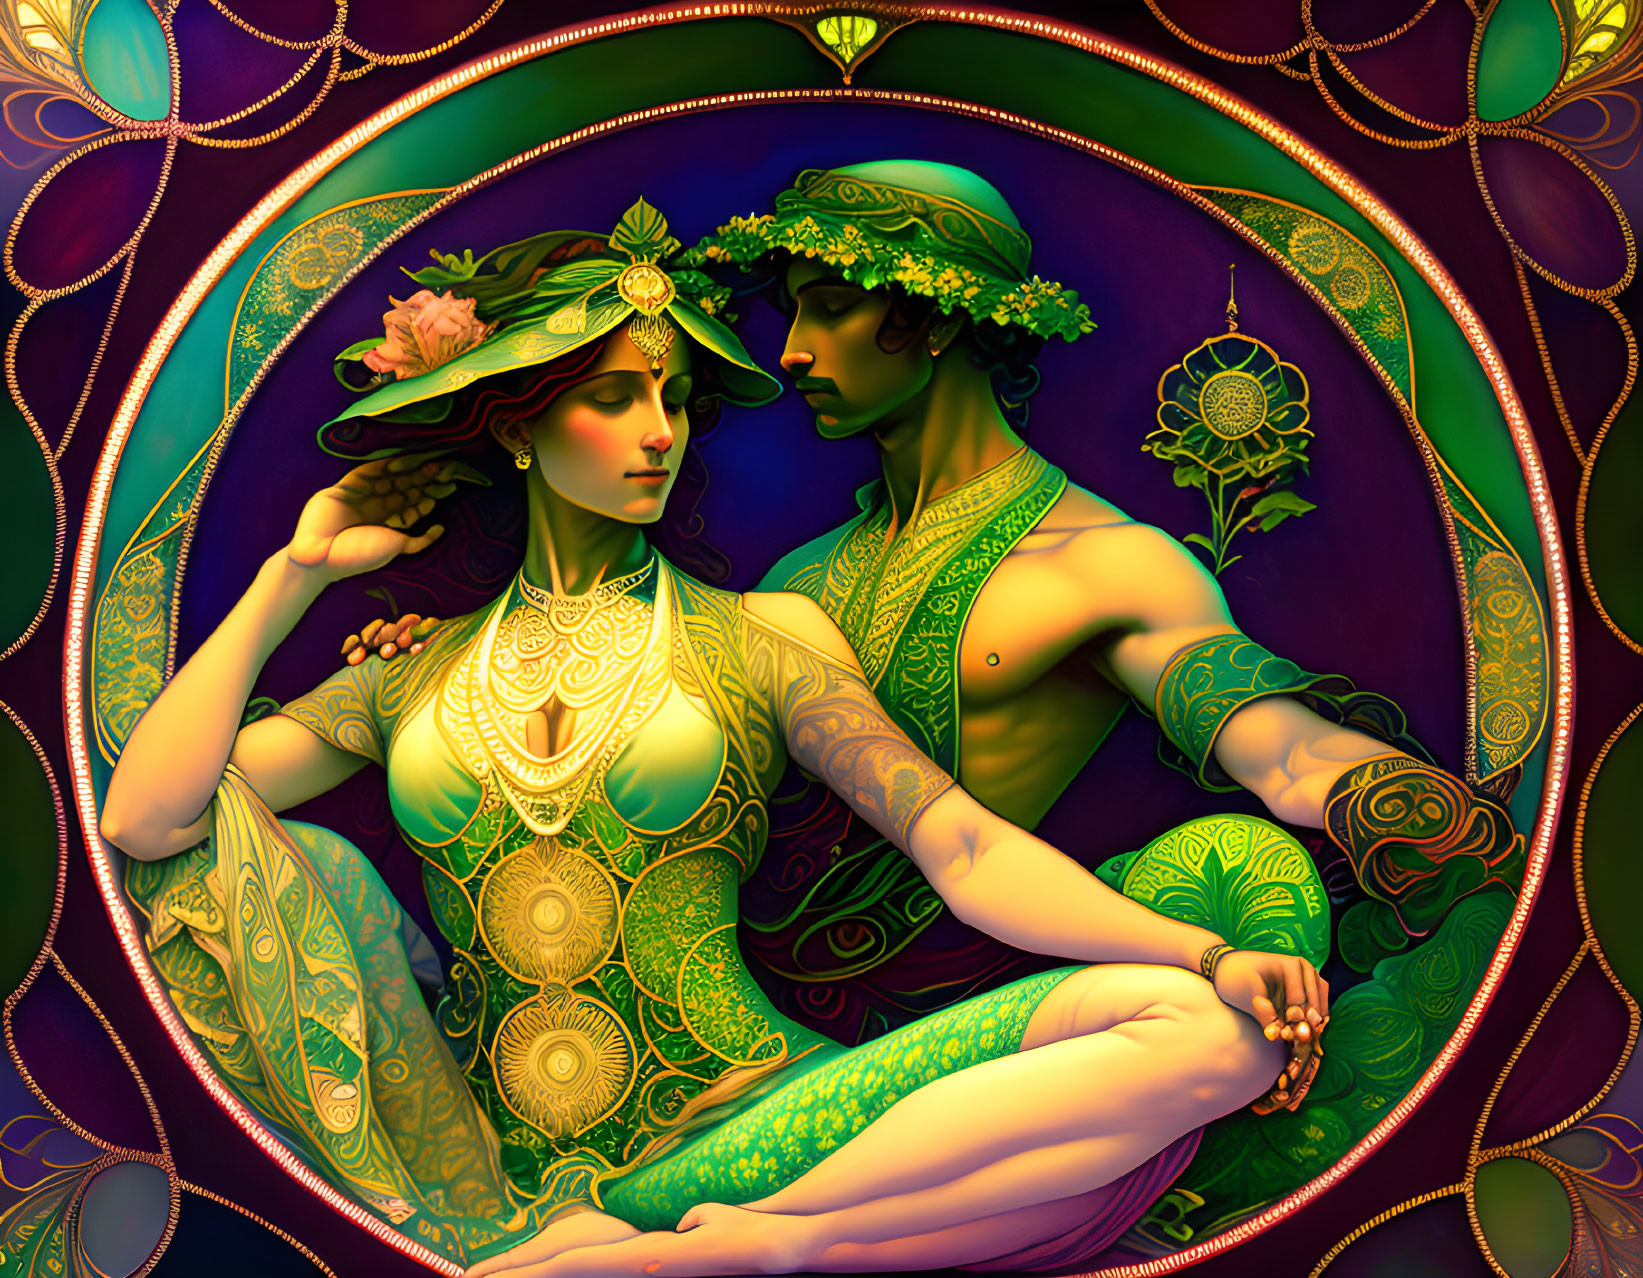 Detailed illustration of man and woman in green and gold attire with floral crowns surrounded by intricate patterns.